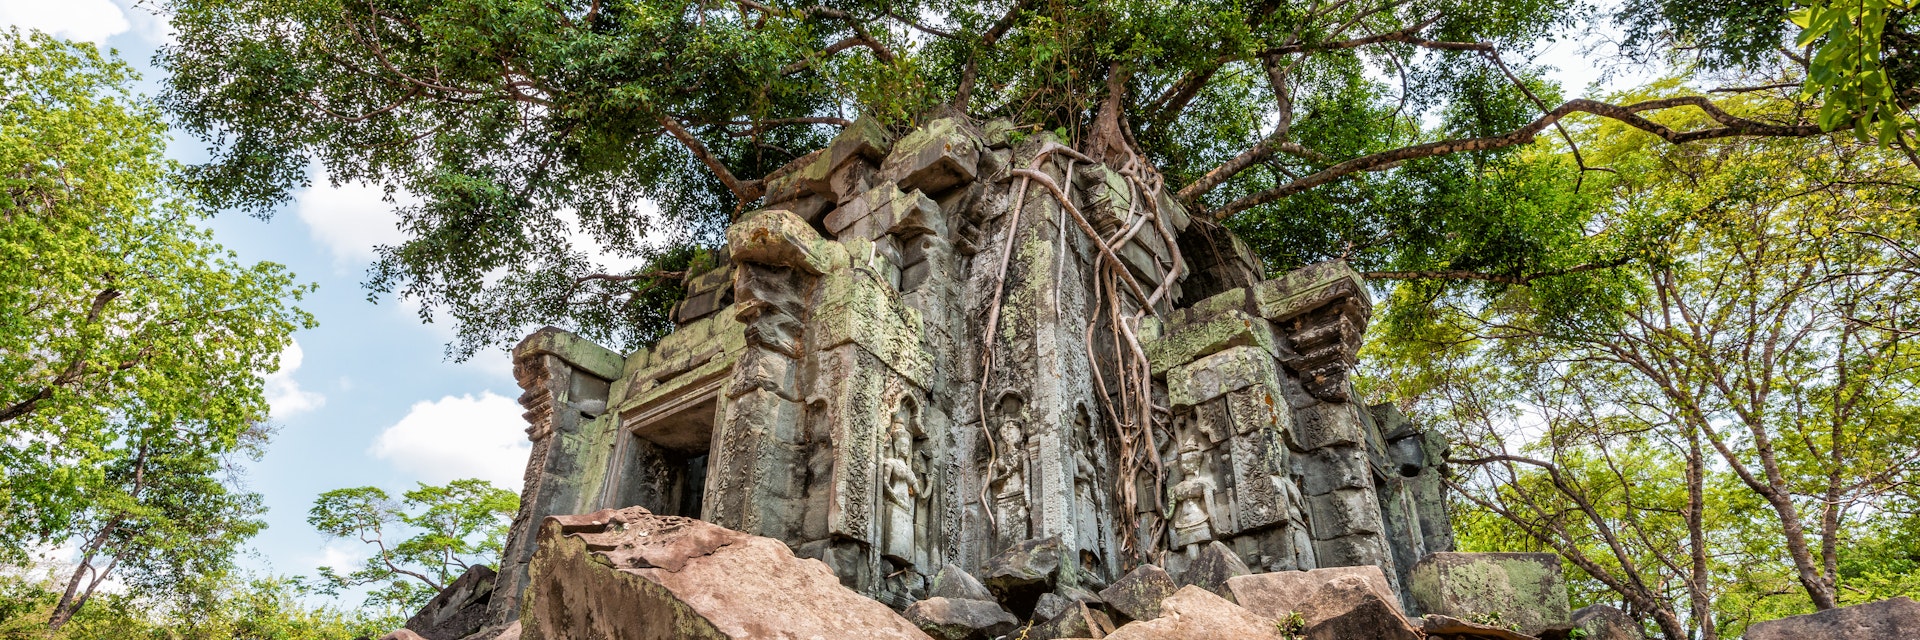 A tree growing through the temple Beng Mealea in Angkor Wat.
500px Photo ID: 155059645
Angkor Wat, Cambodia, Beng Mealea, temple, ruins, rubble, decay, tree, Nikon, travel, travel photography, adventure, amazing, blocks, Siem Reap, SE Asia